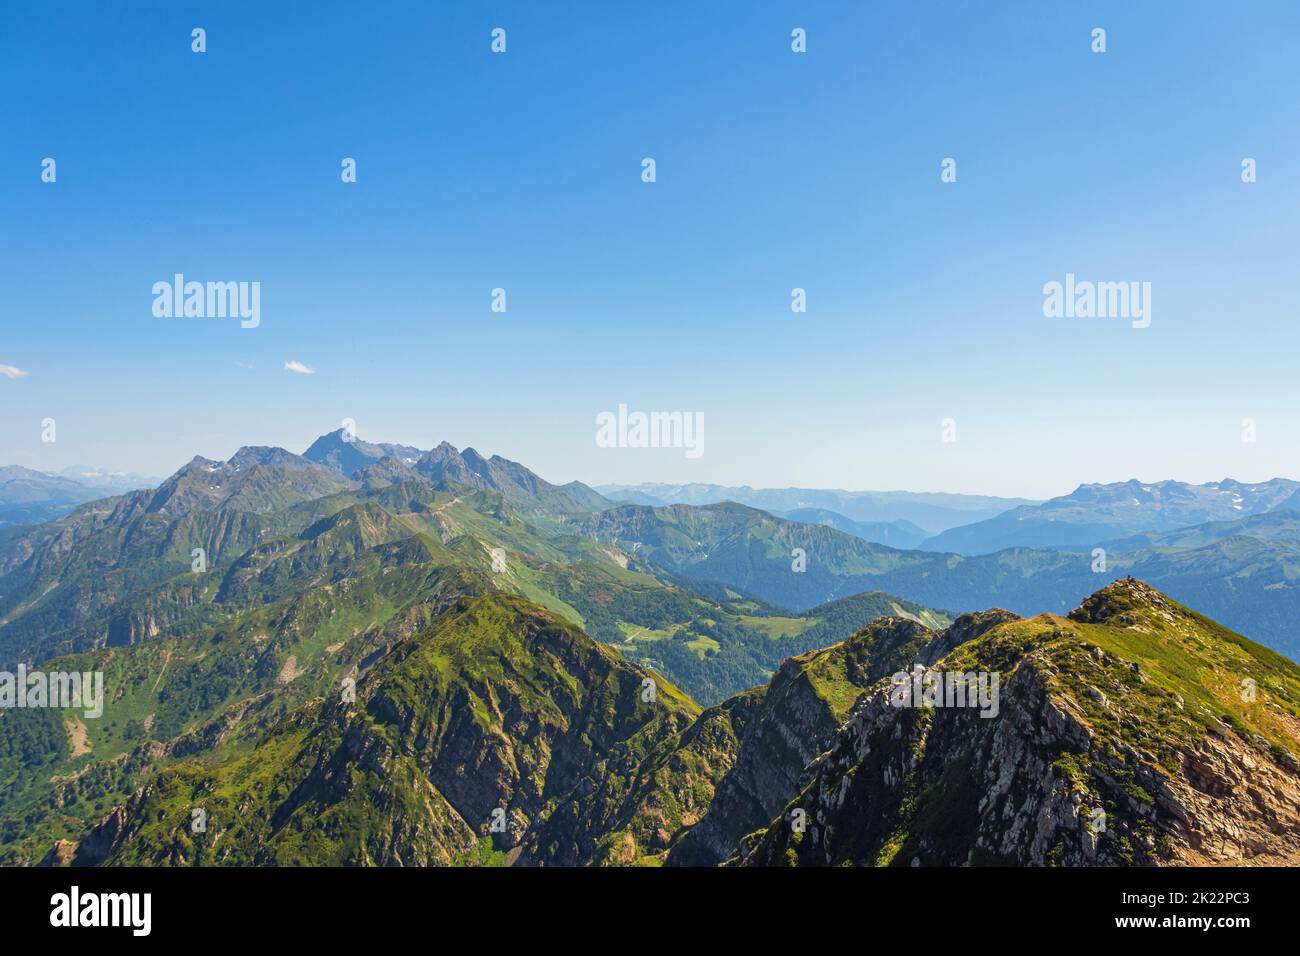 Mountain range with gorges and peaks extending into the distance of the horizon Stock Photo